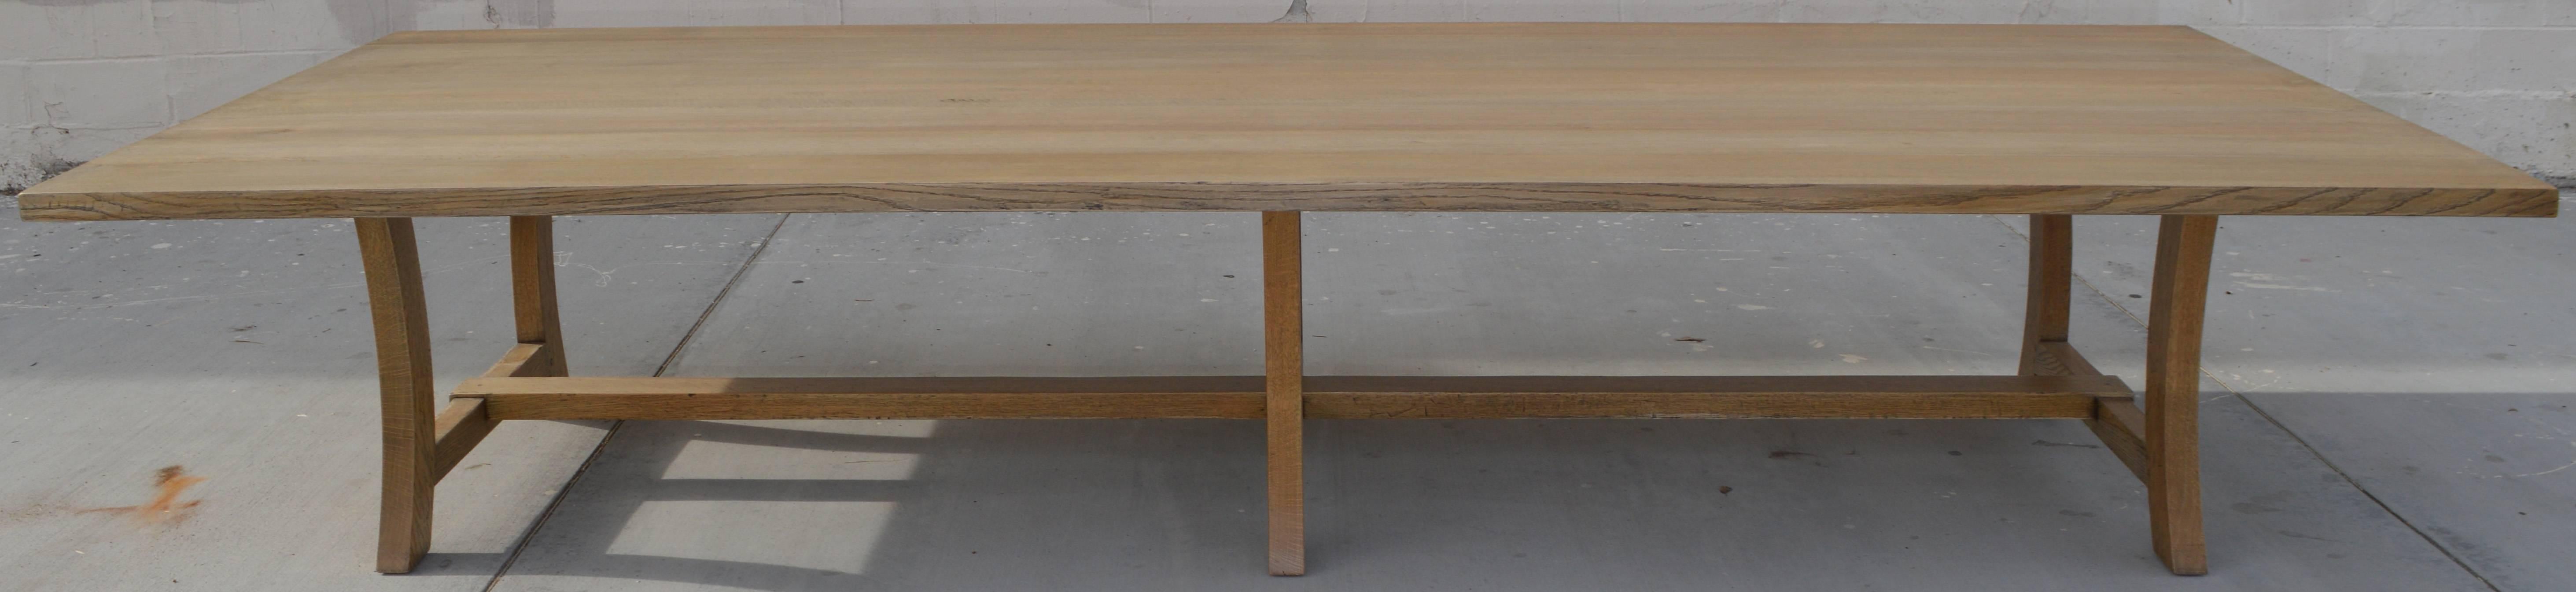 Custom Dining Table in Rift-Sawn White Oak In New Condition For Sale In Los Angeles, CA